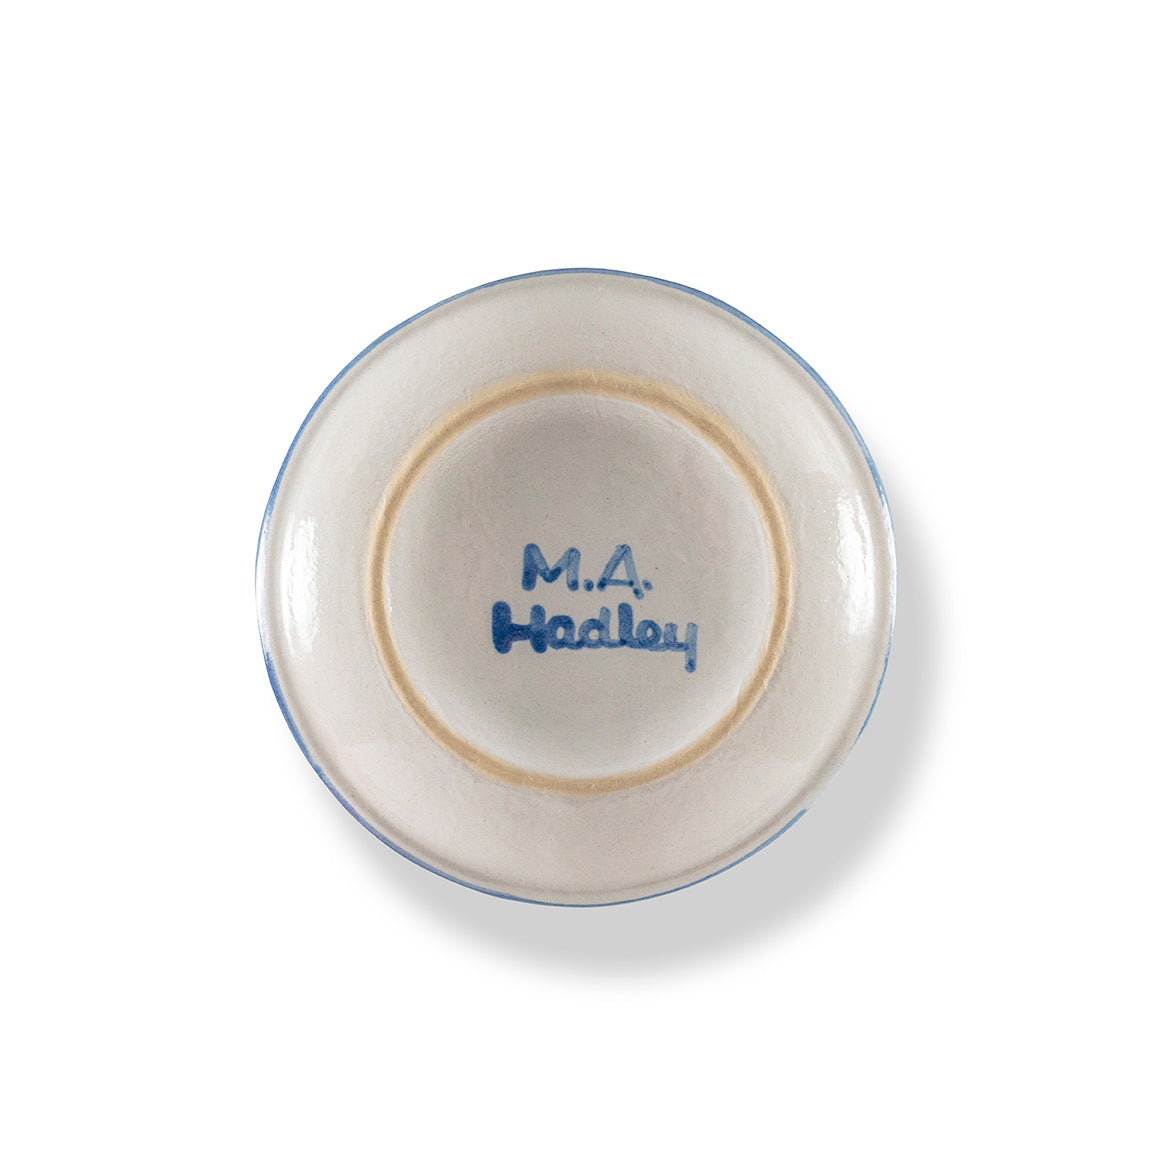 Personalized Wedding Plate - Champagne Coupes